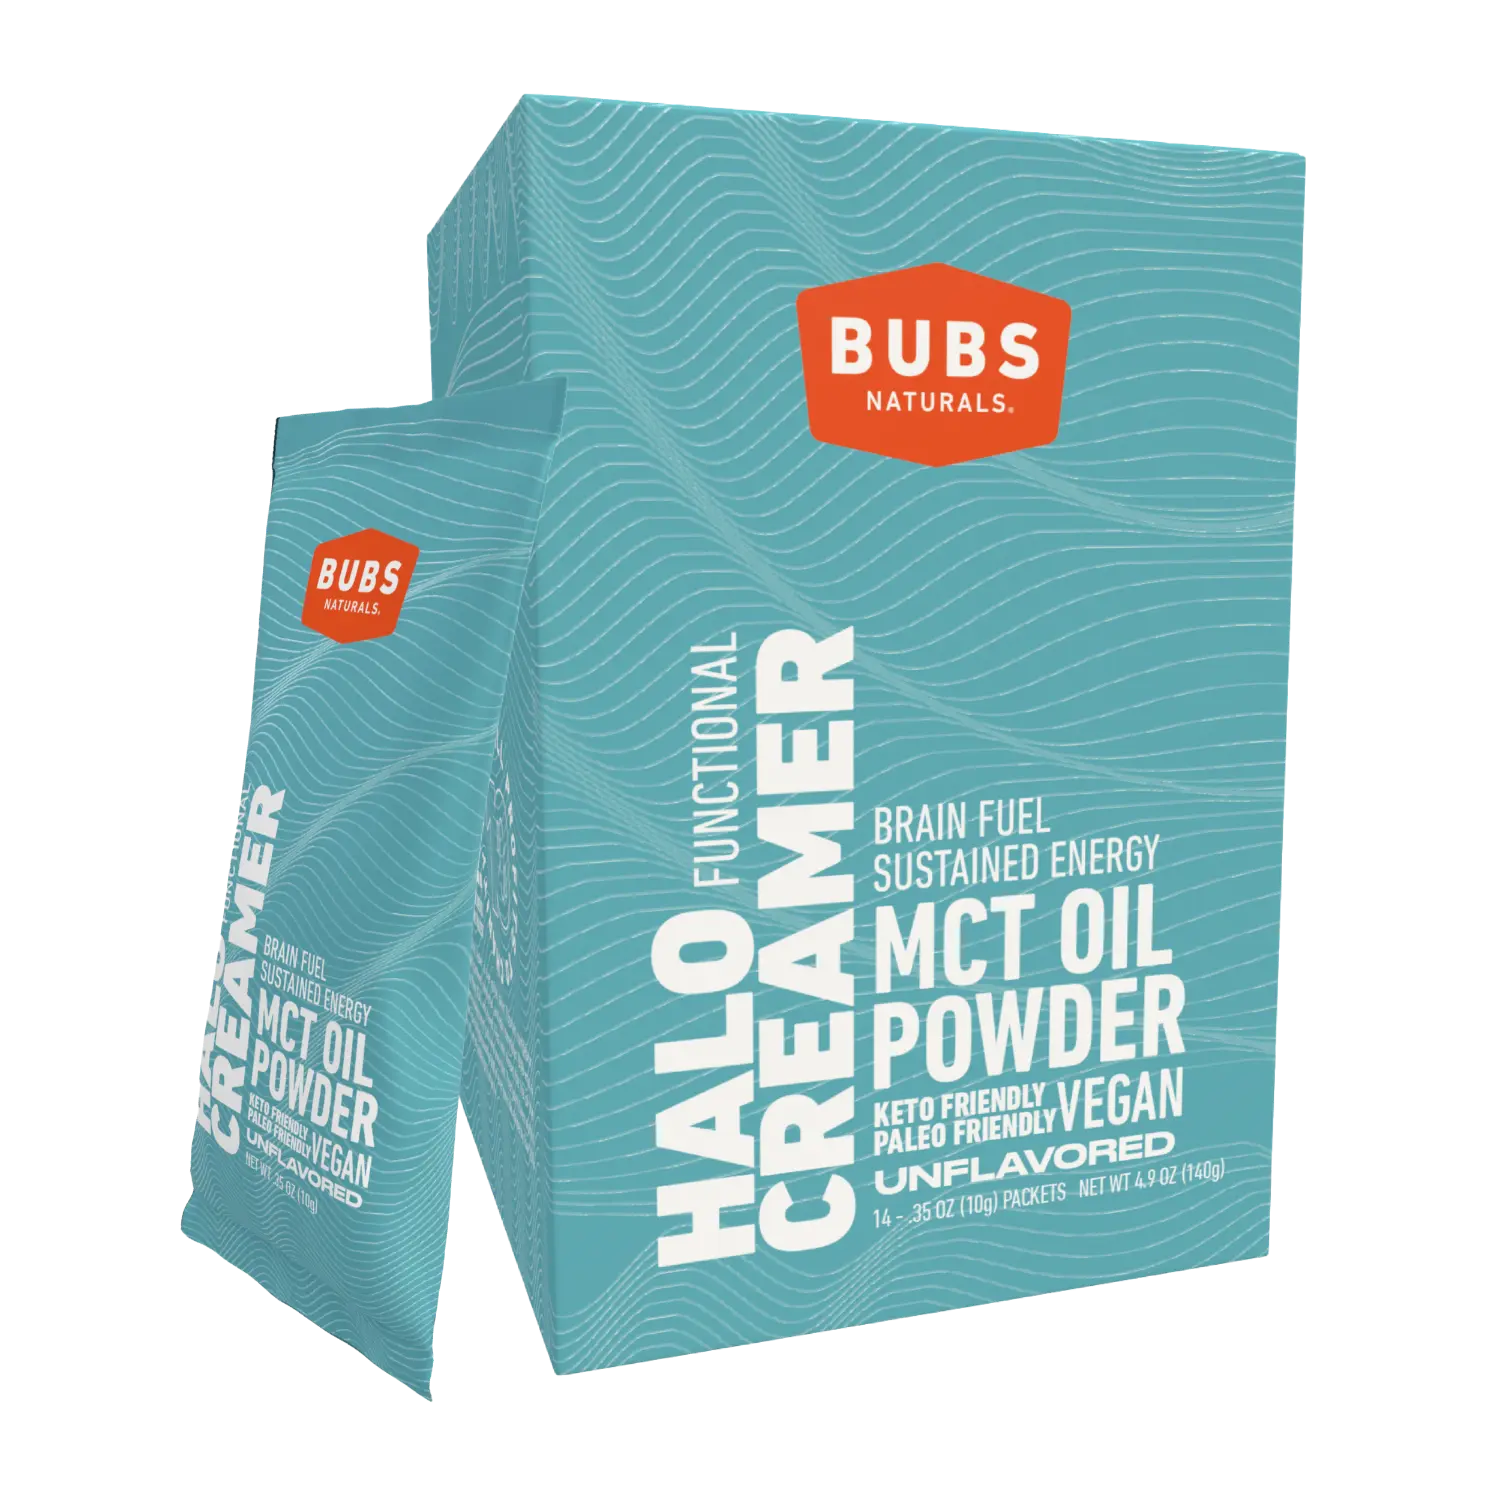 BUBS Naturals MCT Oil Powder, Vegan Halo Functional Creamer, 14ct travel pack, front with stick